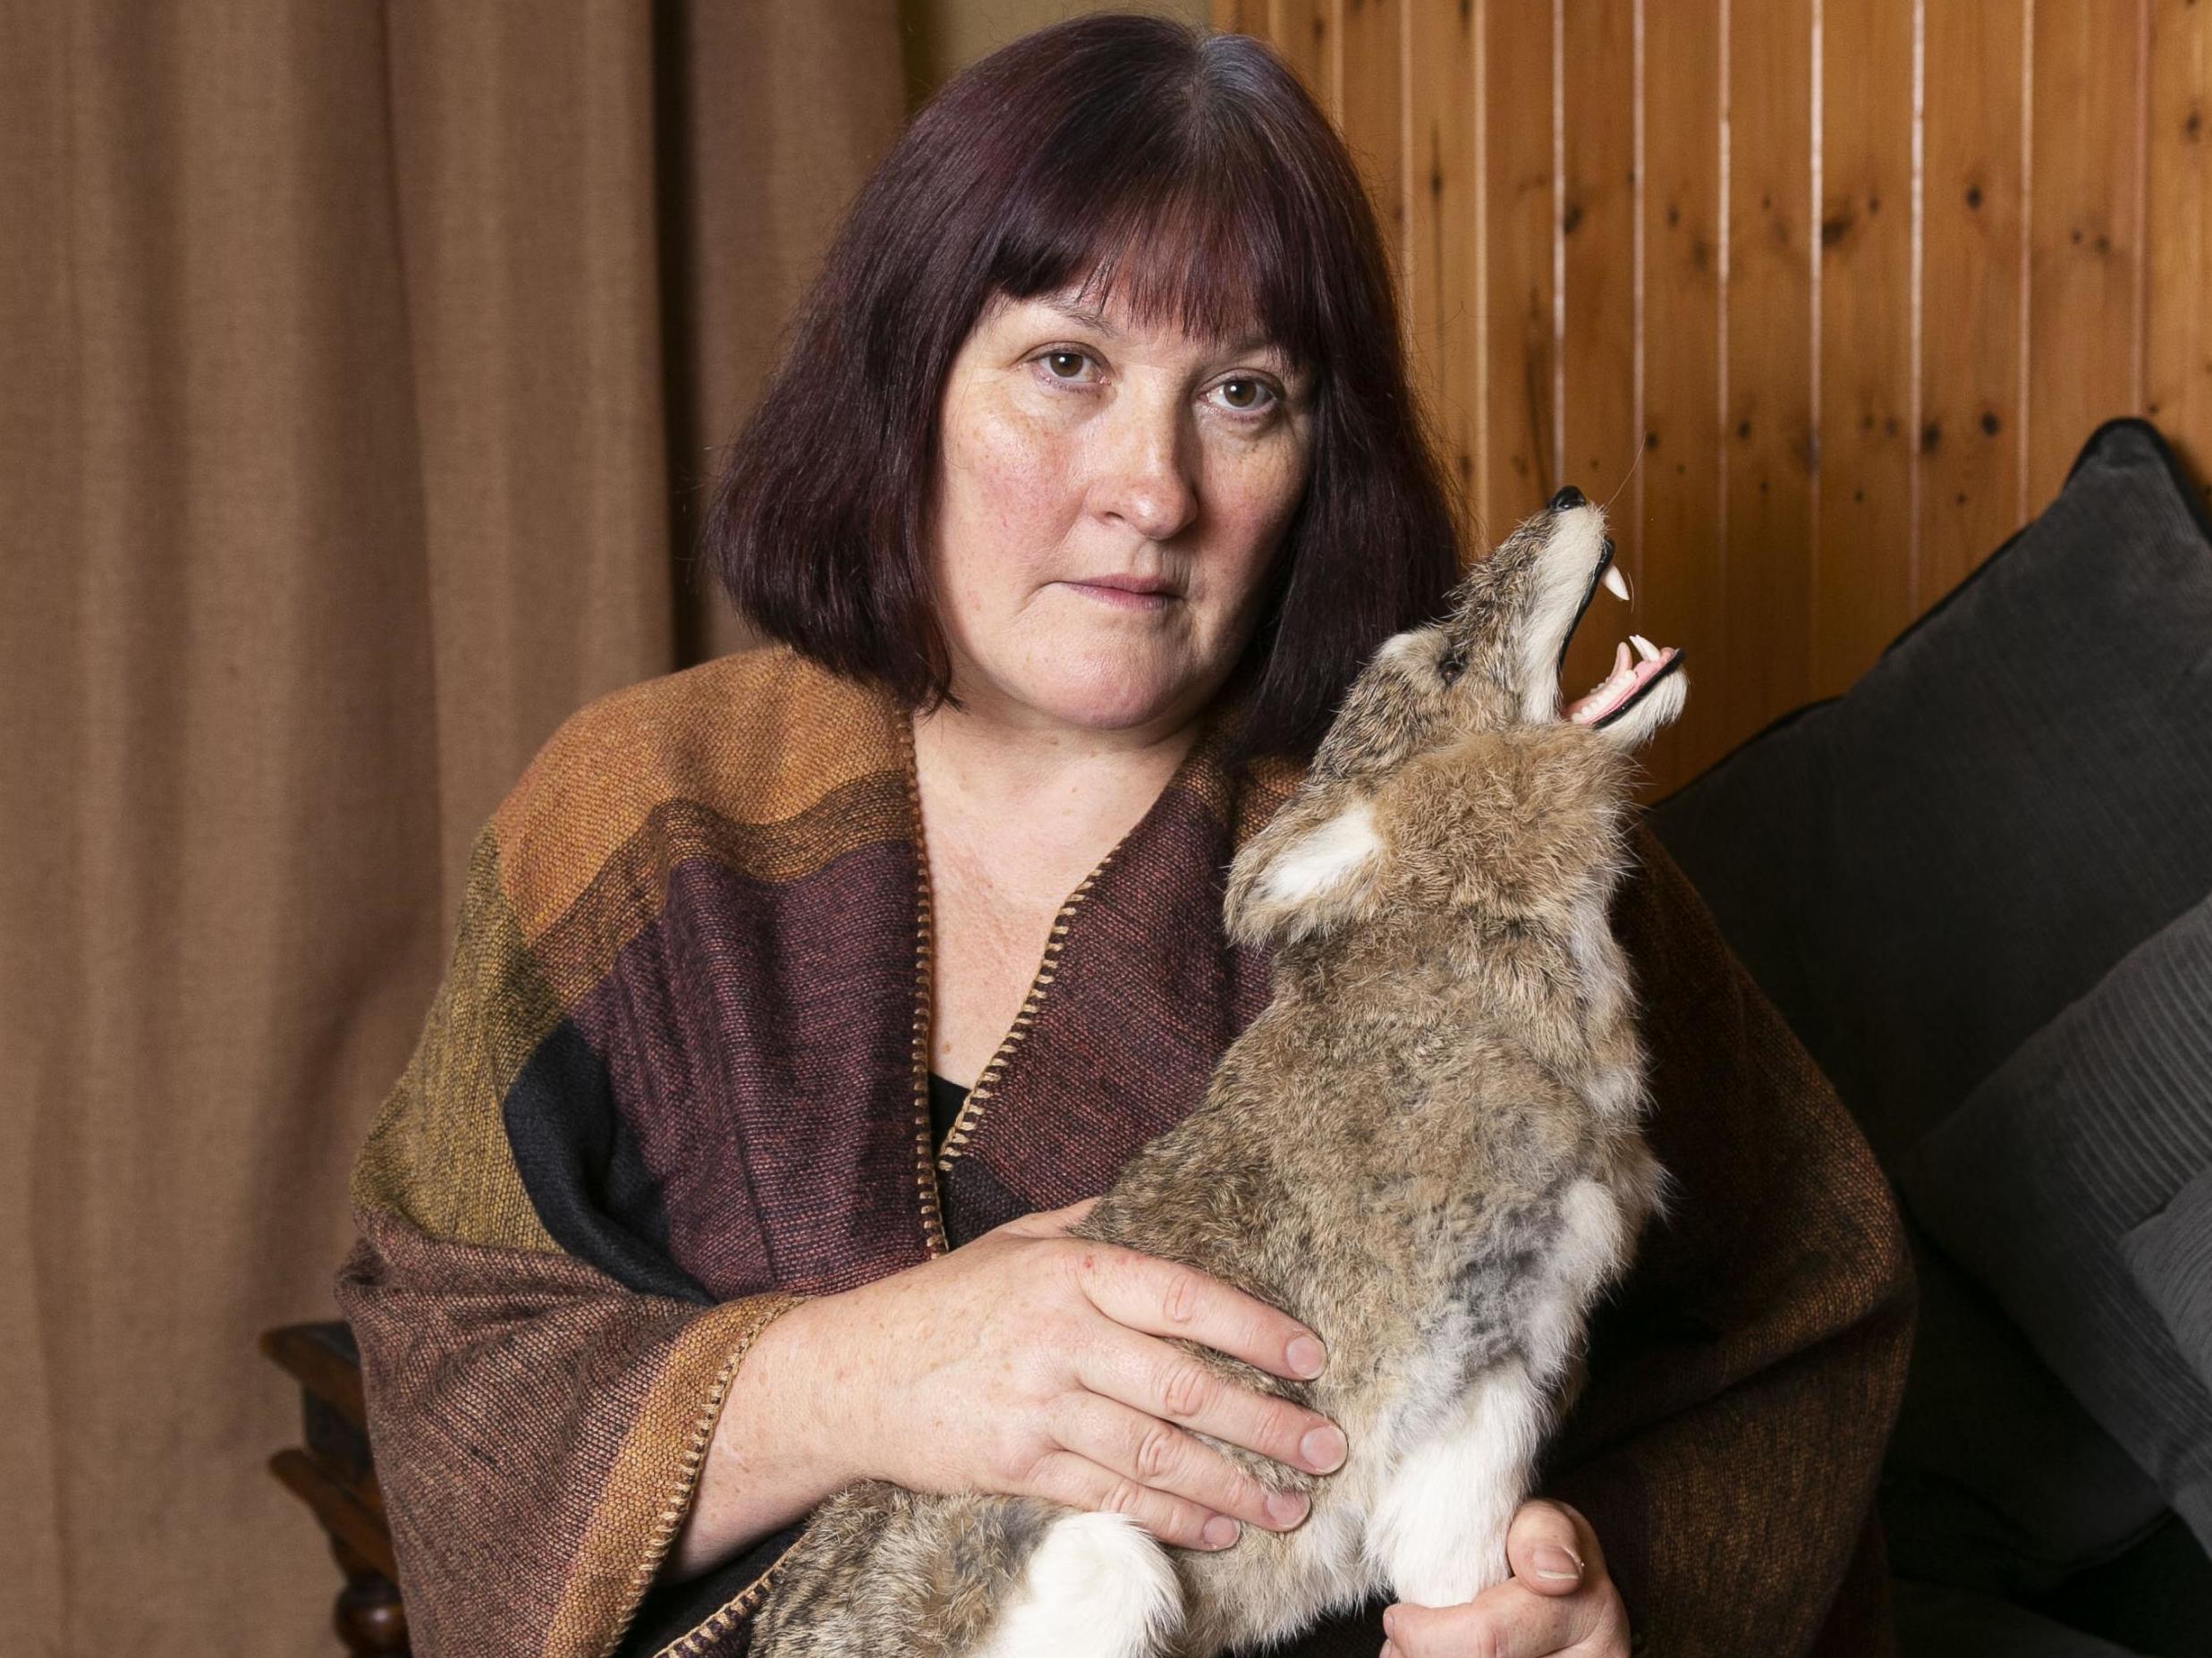 Susan Tate plead guilty to possessing dead animals taken from the wild after a toy wolf (pictured) sparked a police raid